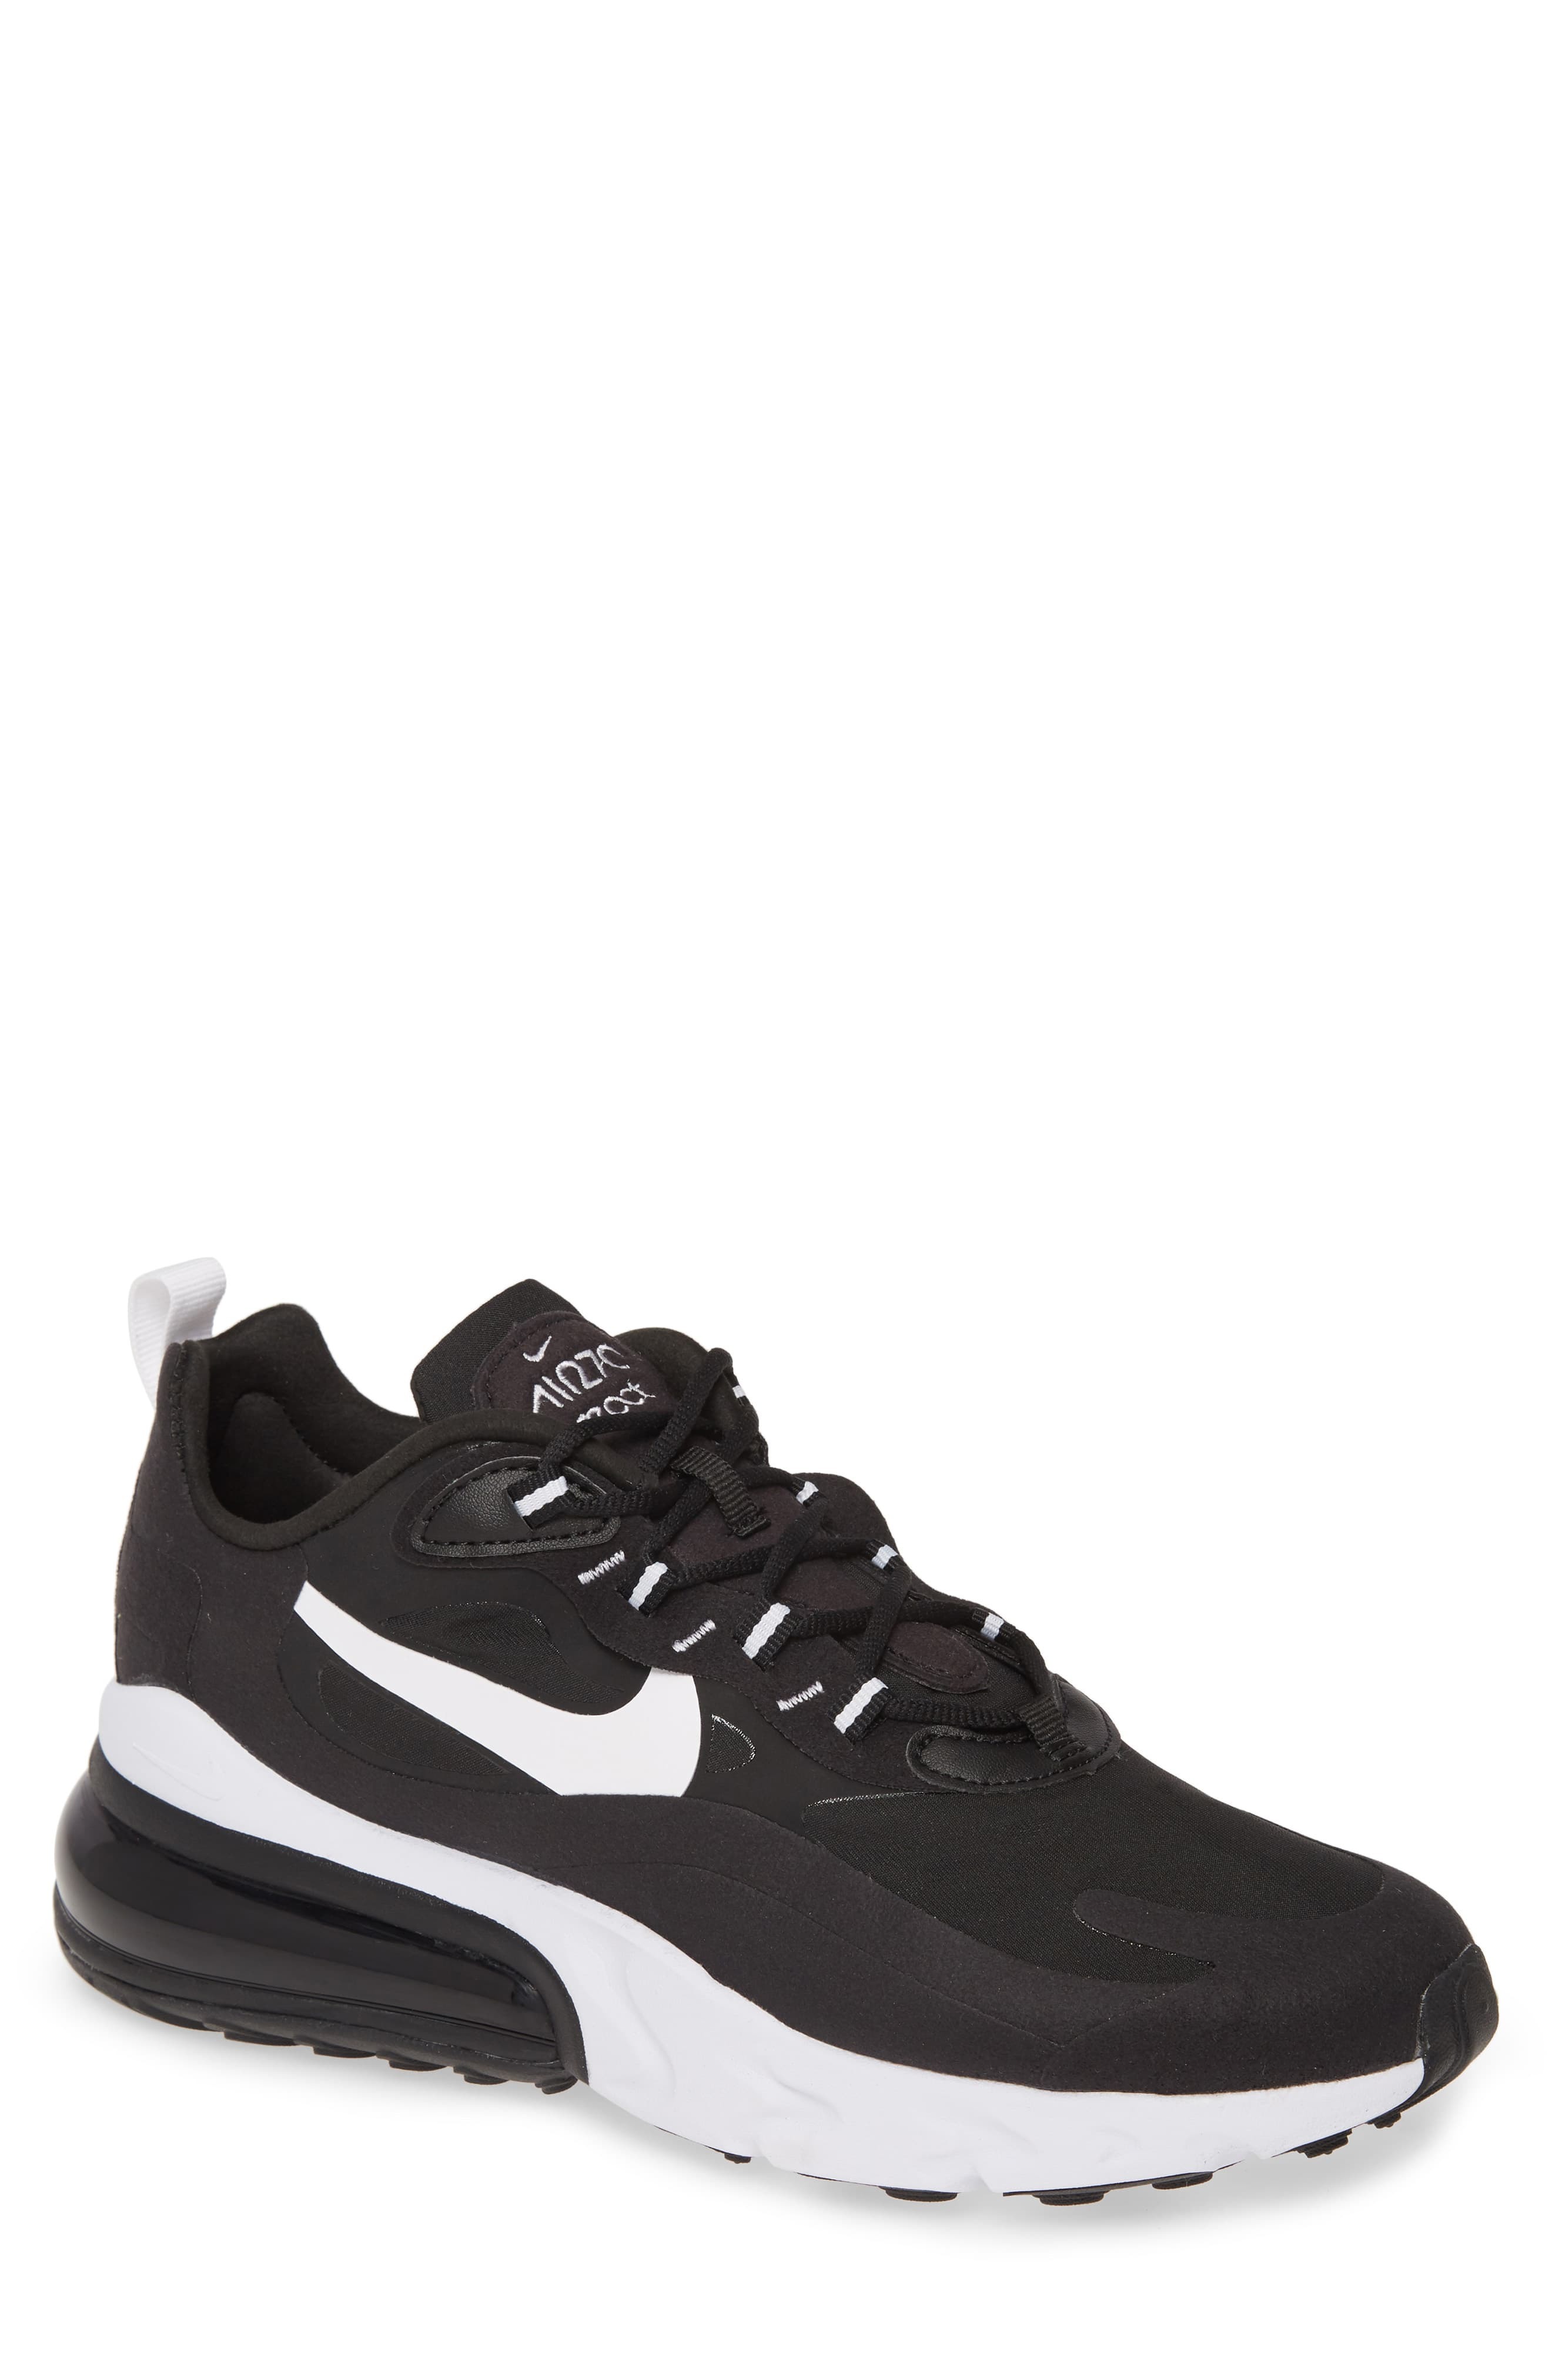 Indefinite More than anything There is a trend Nike Air Max 270 React Sneaker, $150 | Nordstrom | Lookastic